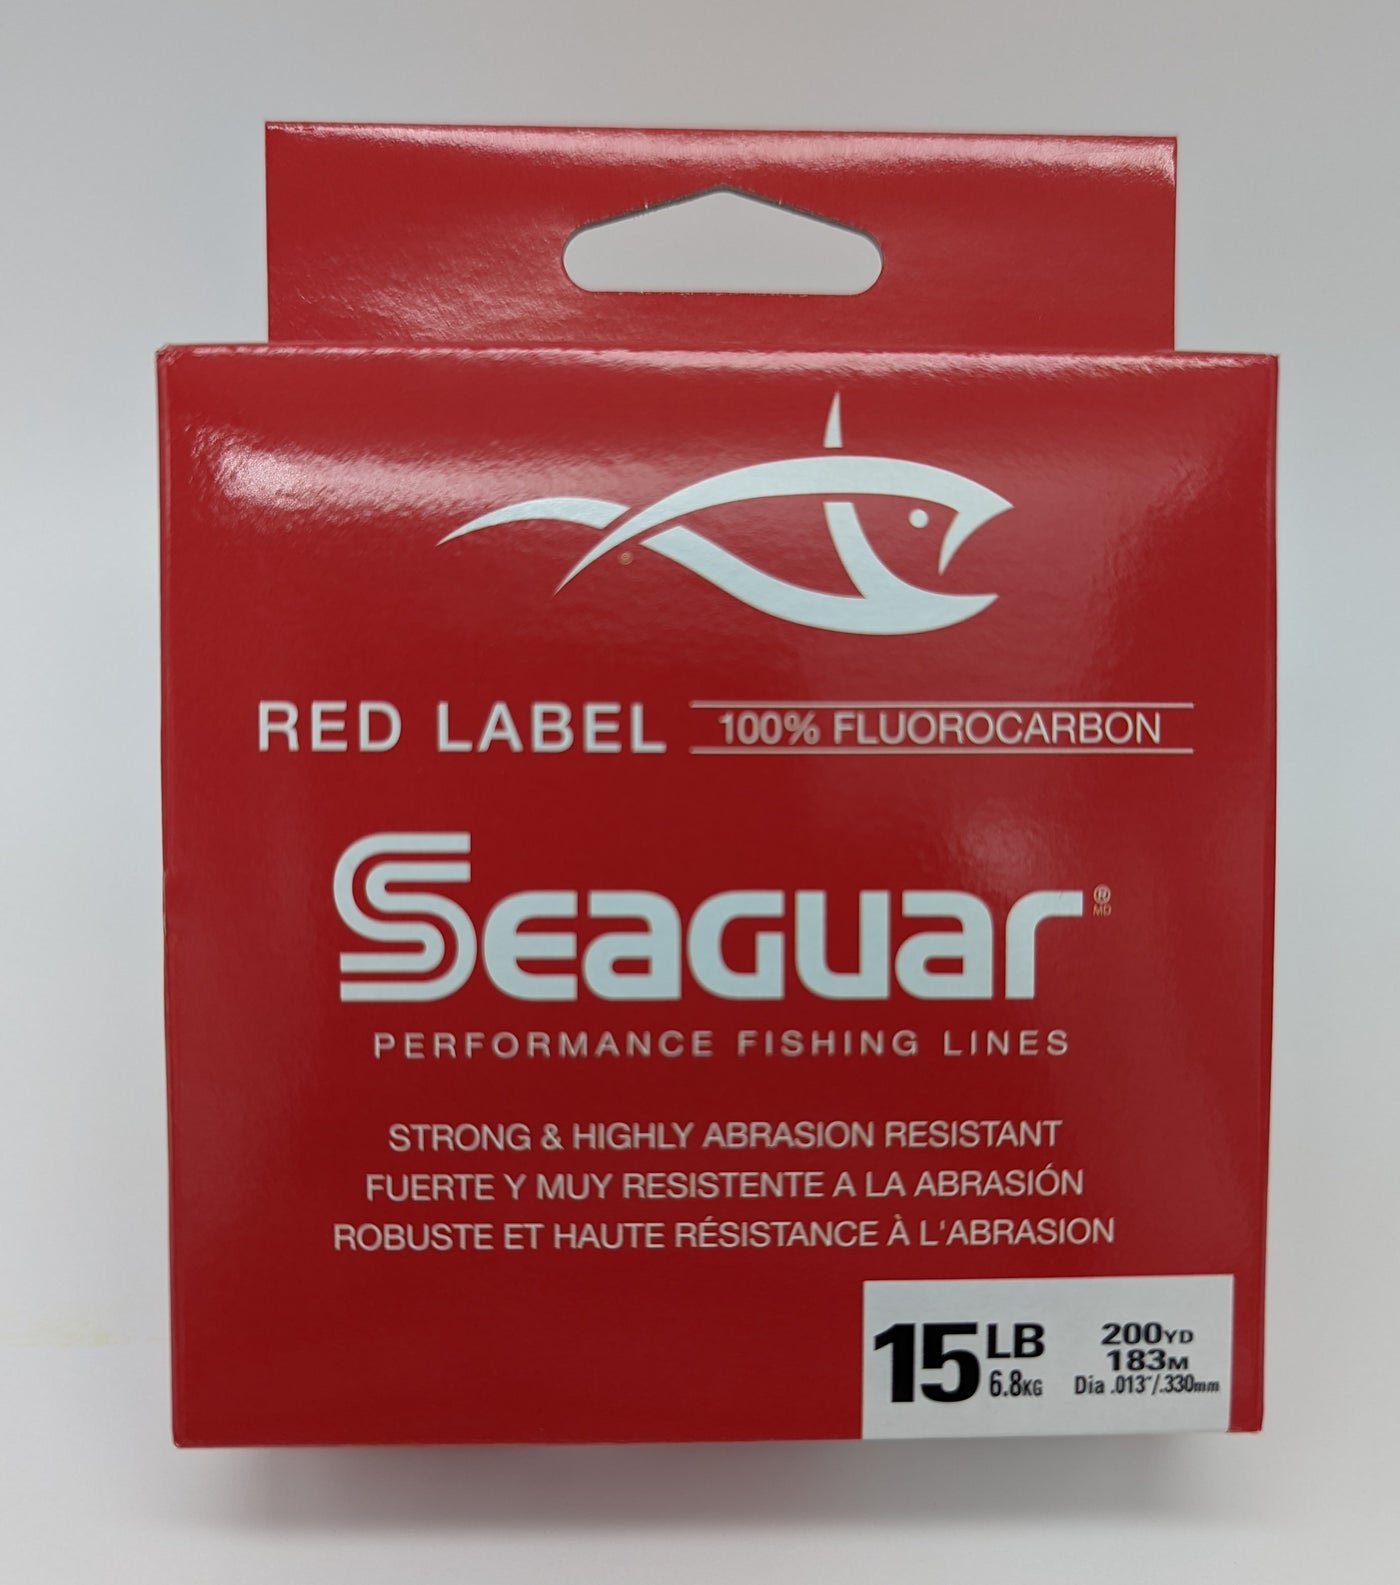 SEAGUAR RED LABEL 100% Fluorocarbon Fishing Line 200 YARDS SPOOLS PICK YOUR  SIZE